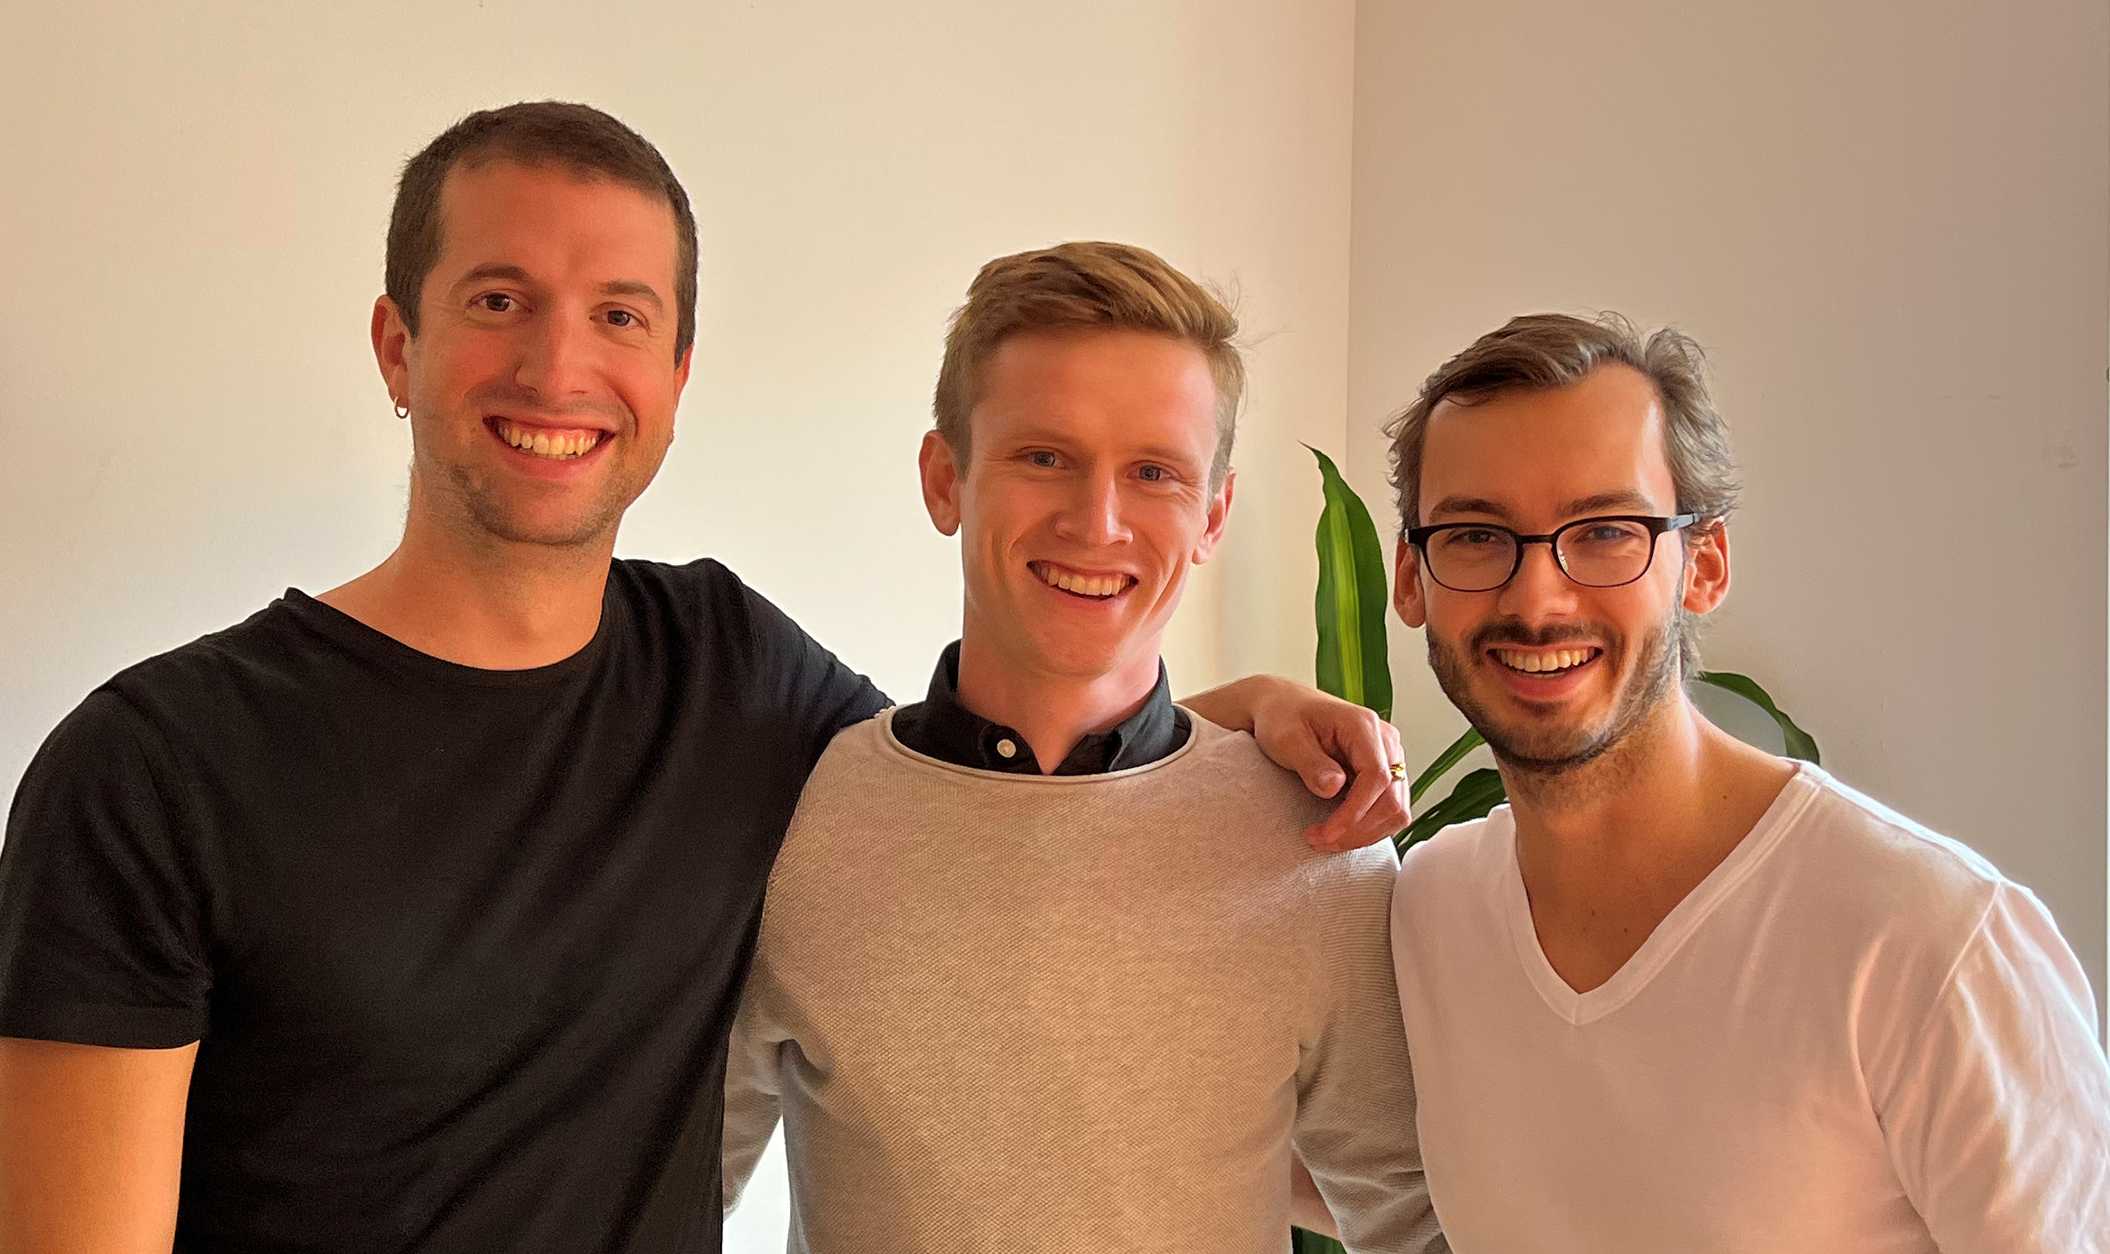 The three Quazel founders David Niederberger, Samuel Bissegger and Philipp Hadjimina (from left to right)